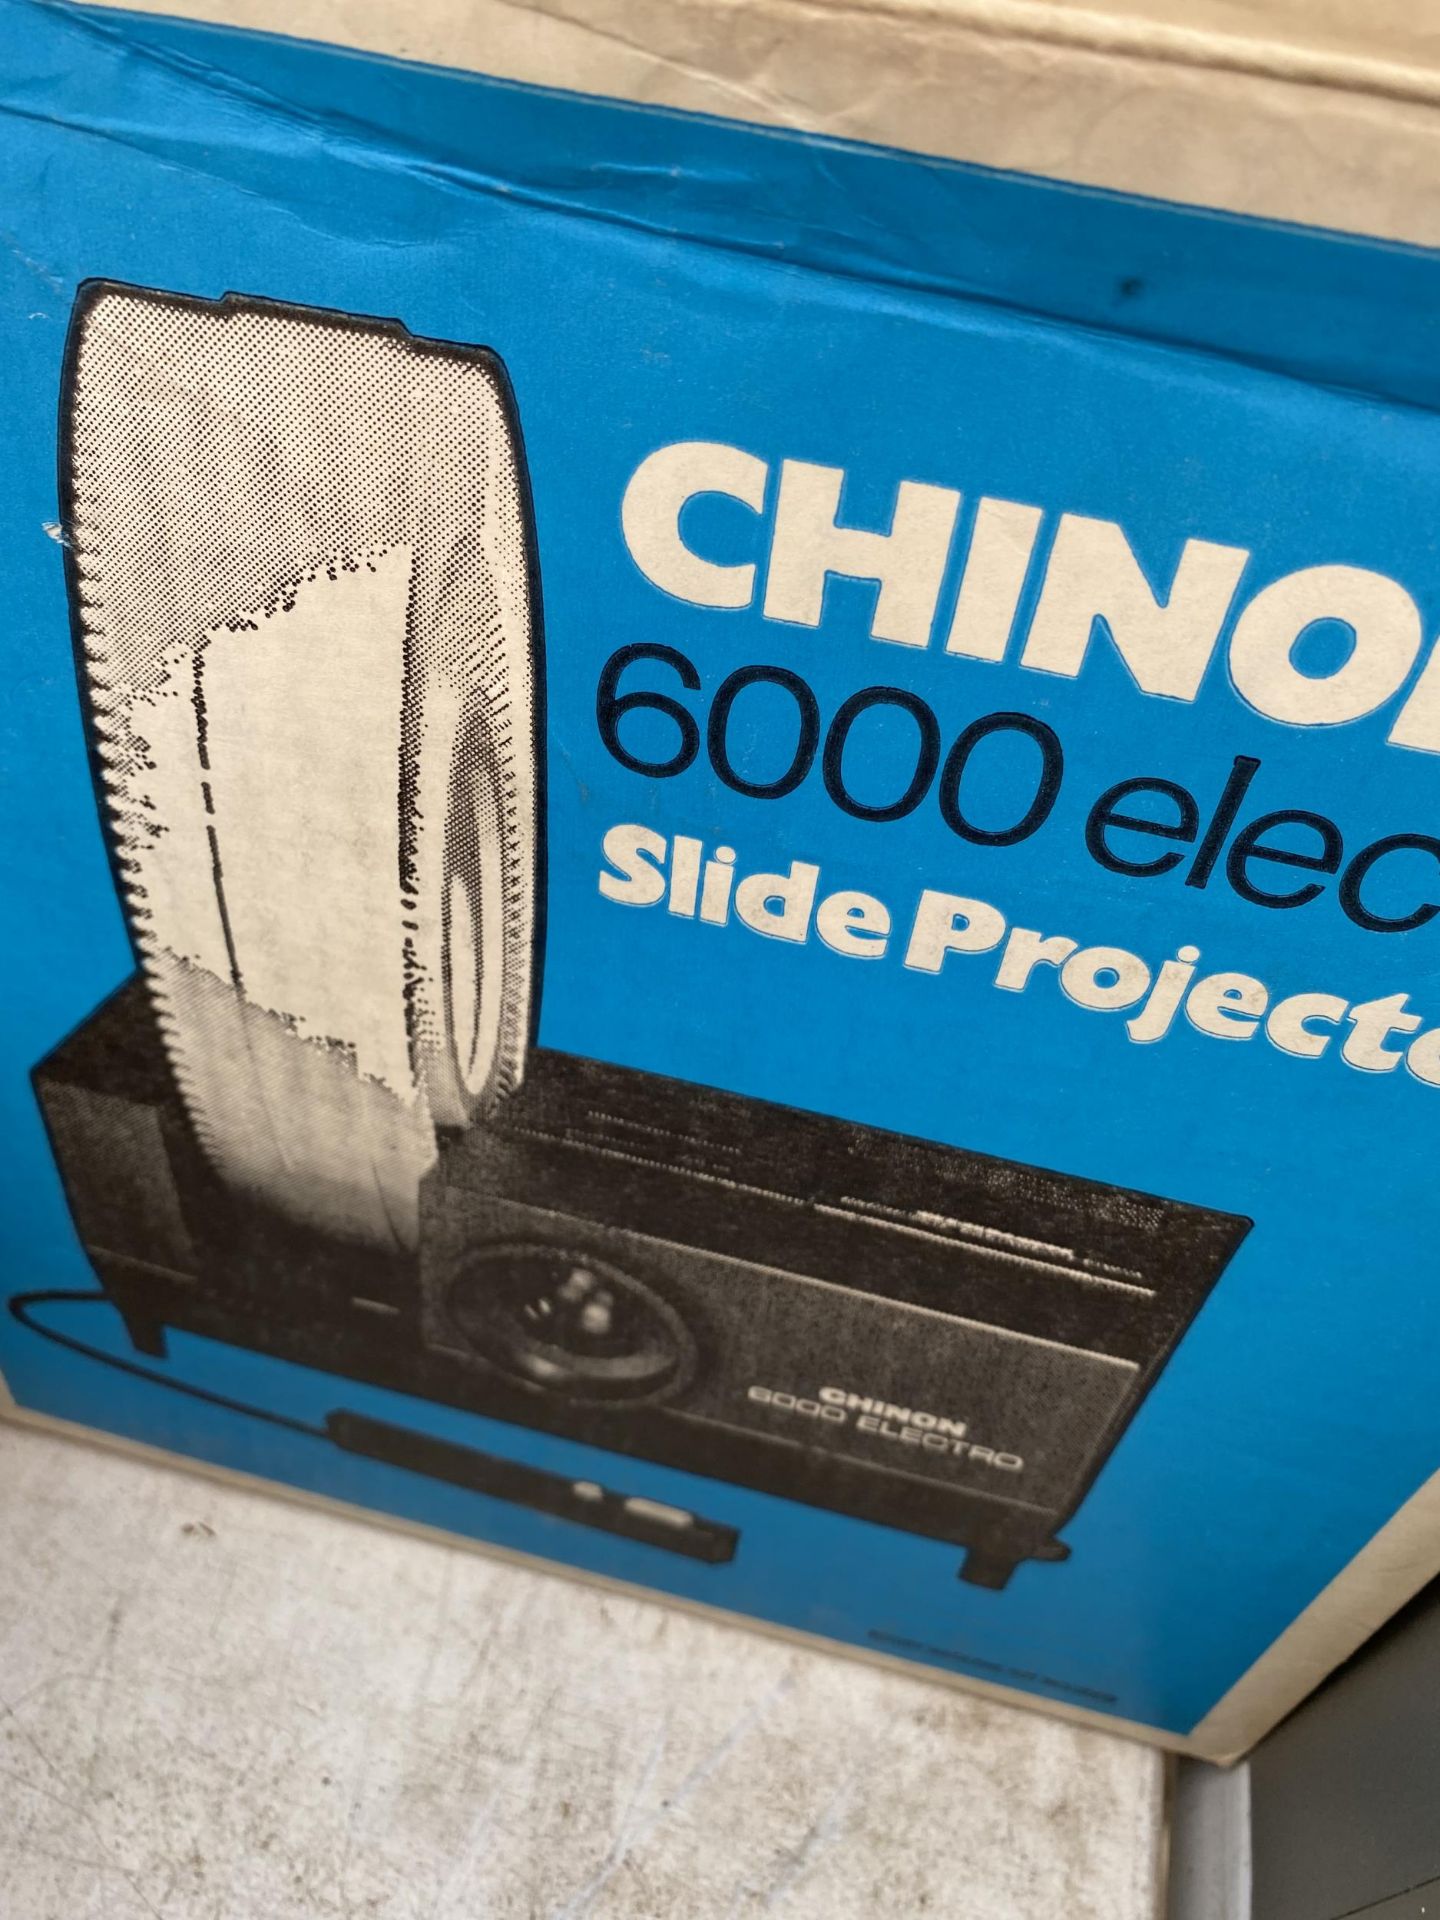 A CHINON 6000 ELECTRO SLIDE PROJECTOR - Image 2 of 2